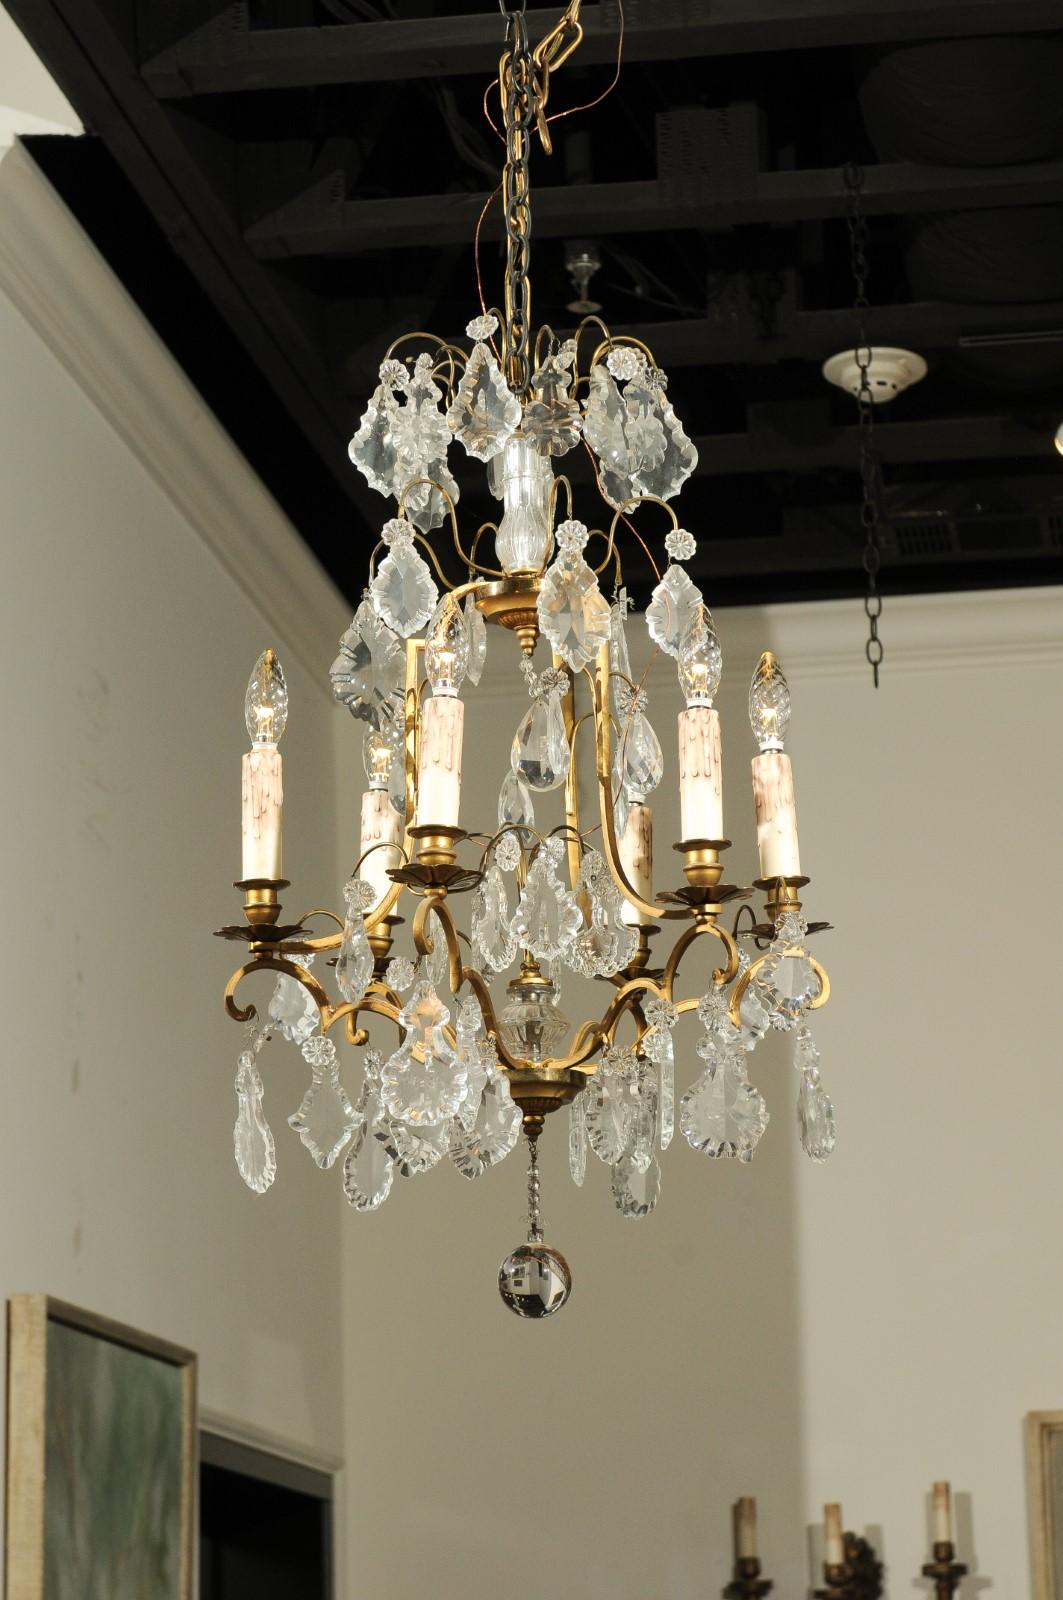 A French six-light crystal chandelier from the late 19th century, with brass armature and crystal column. Born in France during the later years of the 19th century, this lovely chandelier features a brass structure adorned with a central crystal